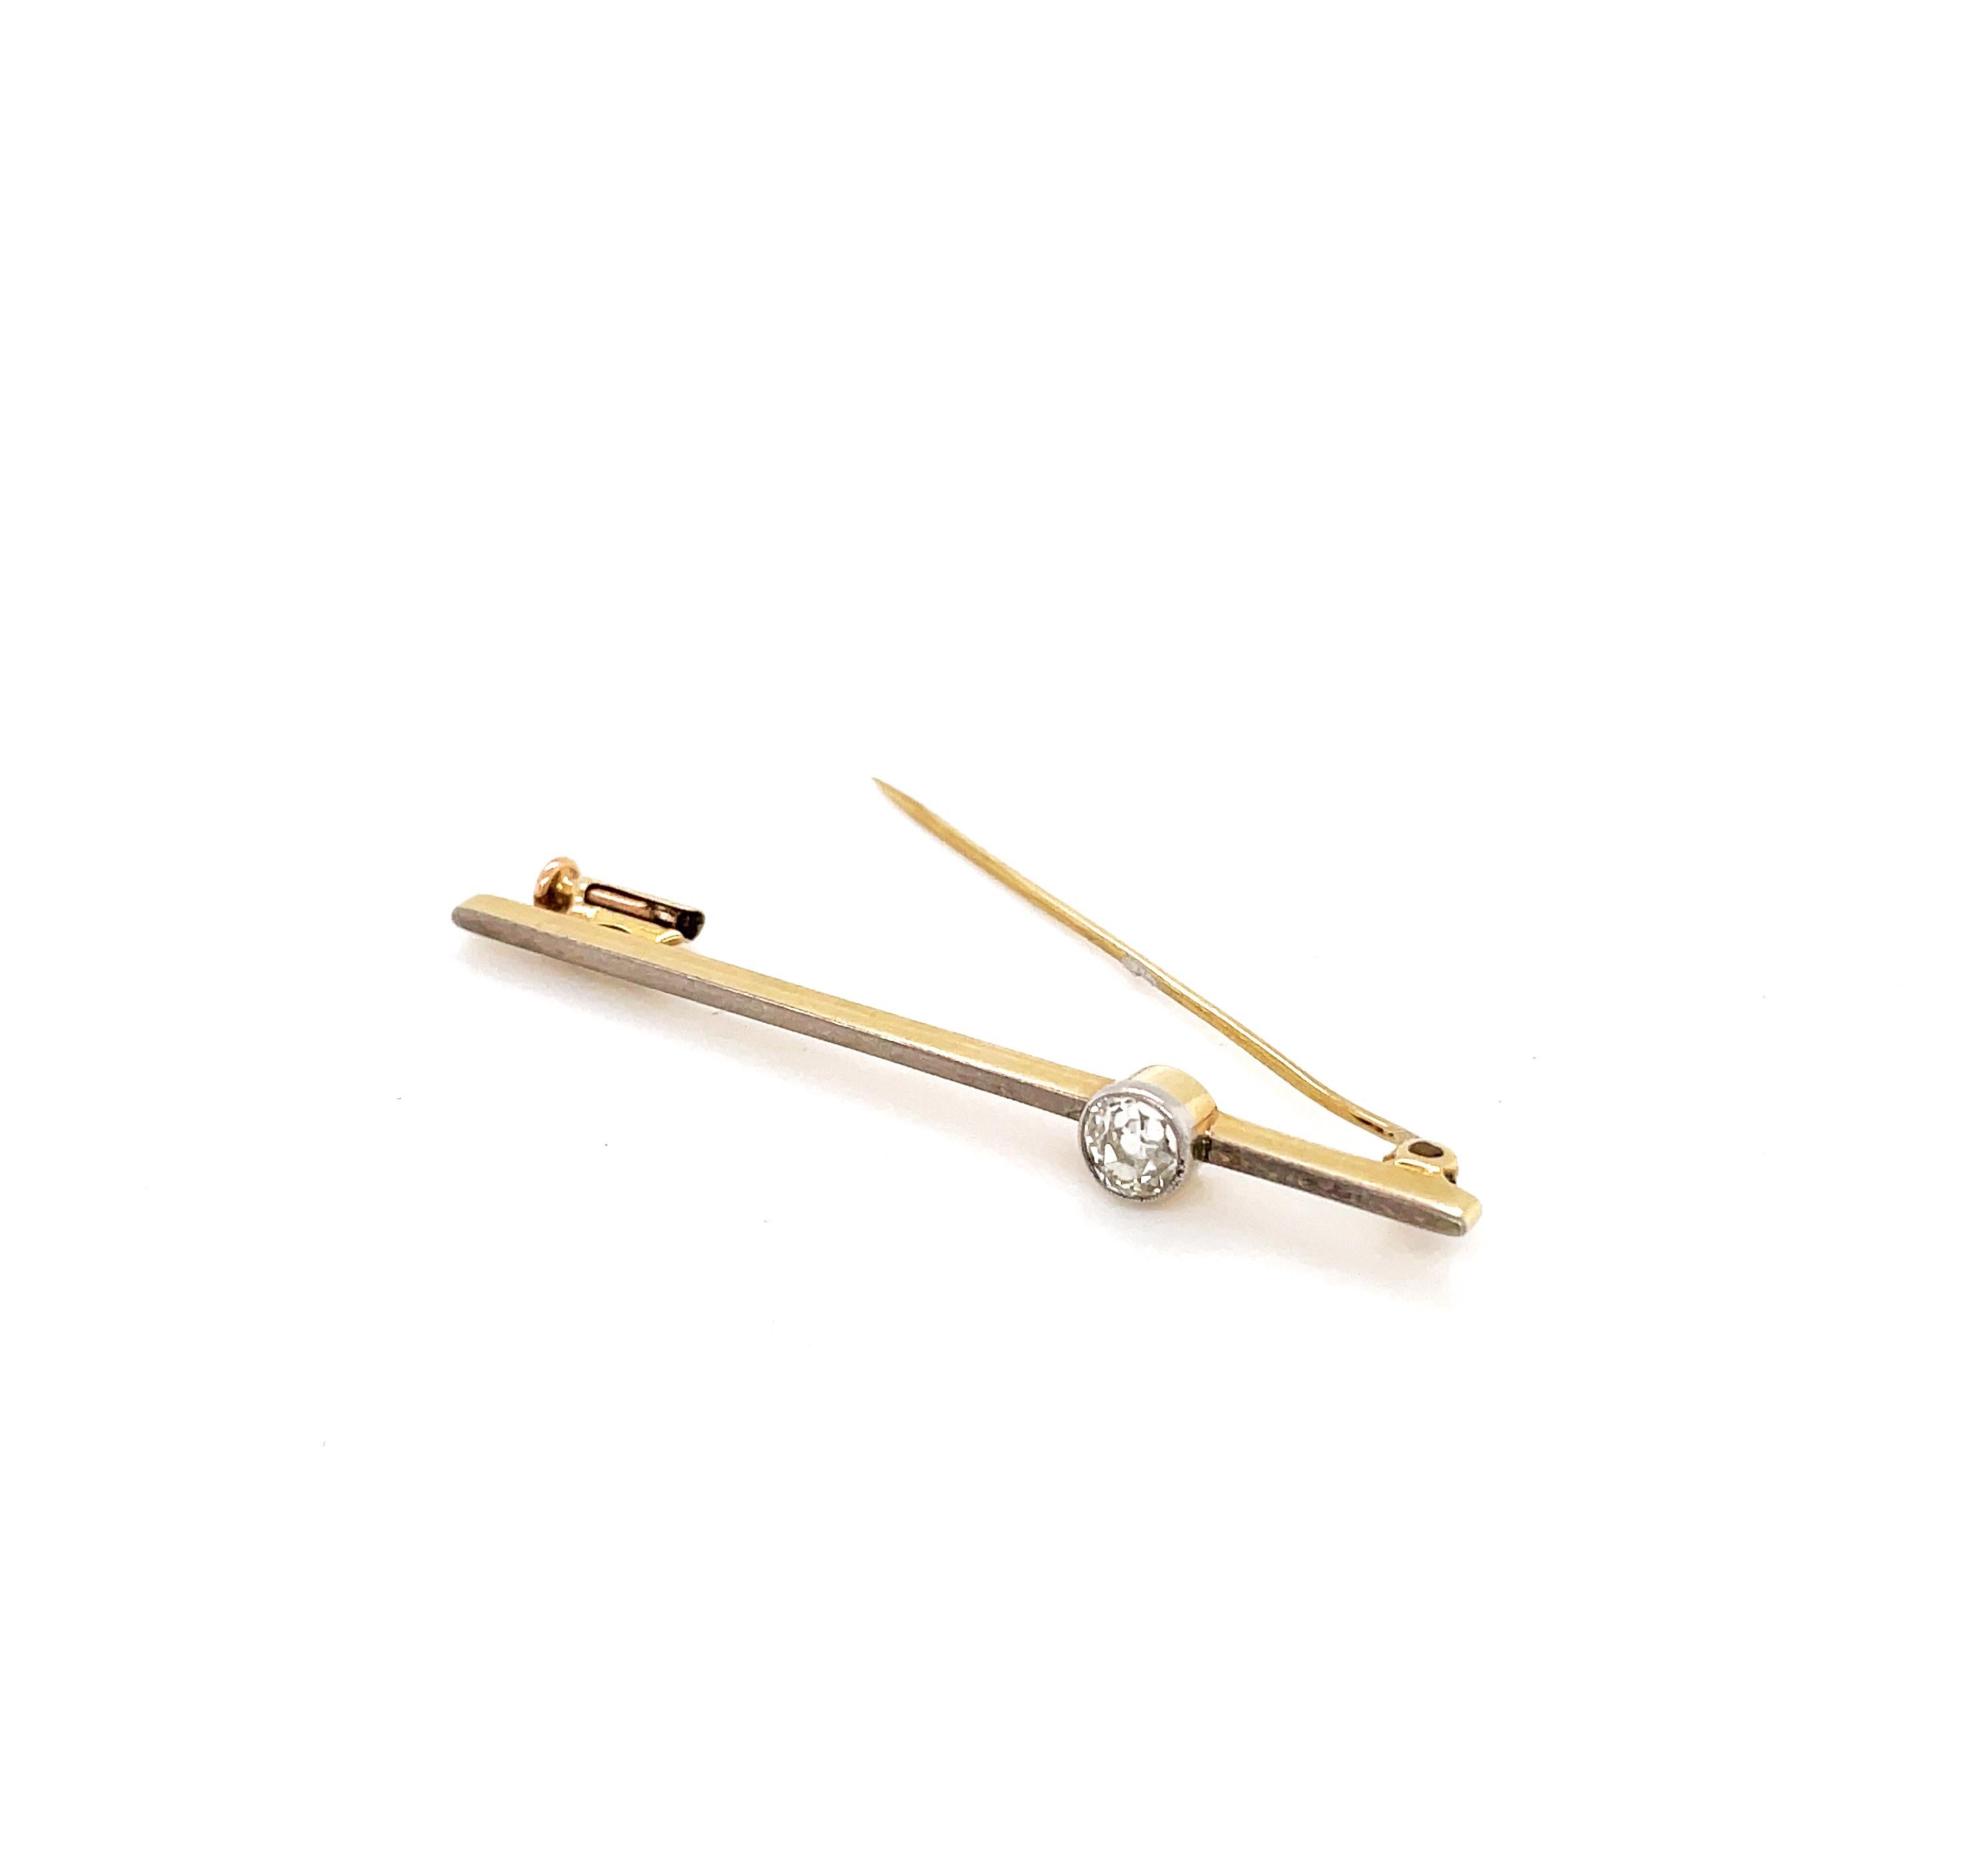 This gorgeous antique bar brooch features a rub over set old cut diamond weighing approximately 0.40ct. The stone is perfectly mounted in a platinum on 18 carat yellow gold bar brooch finished with a secure pin closure. The piece is beautifully